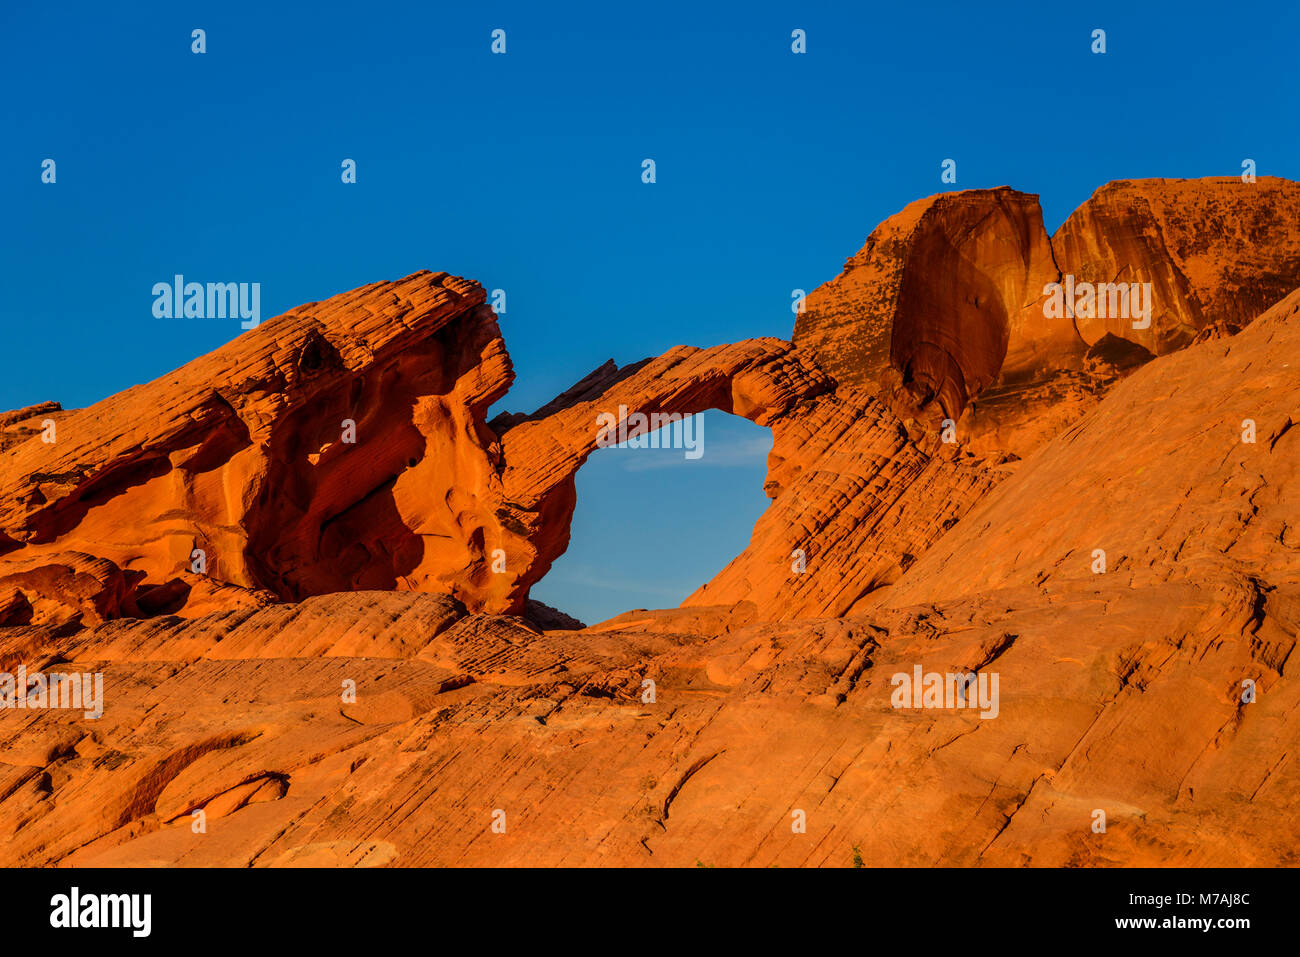 The USA, Nevada, Clark County, Overton, Valley of Fire State Park, Arch Rock in the evening light Stock Photo